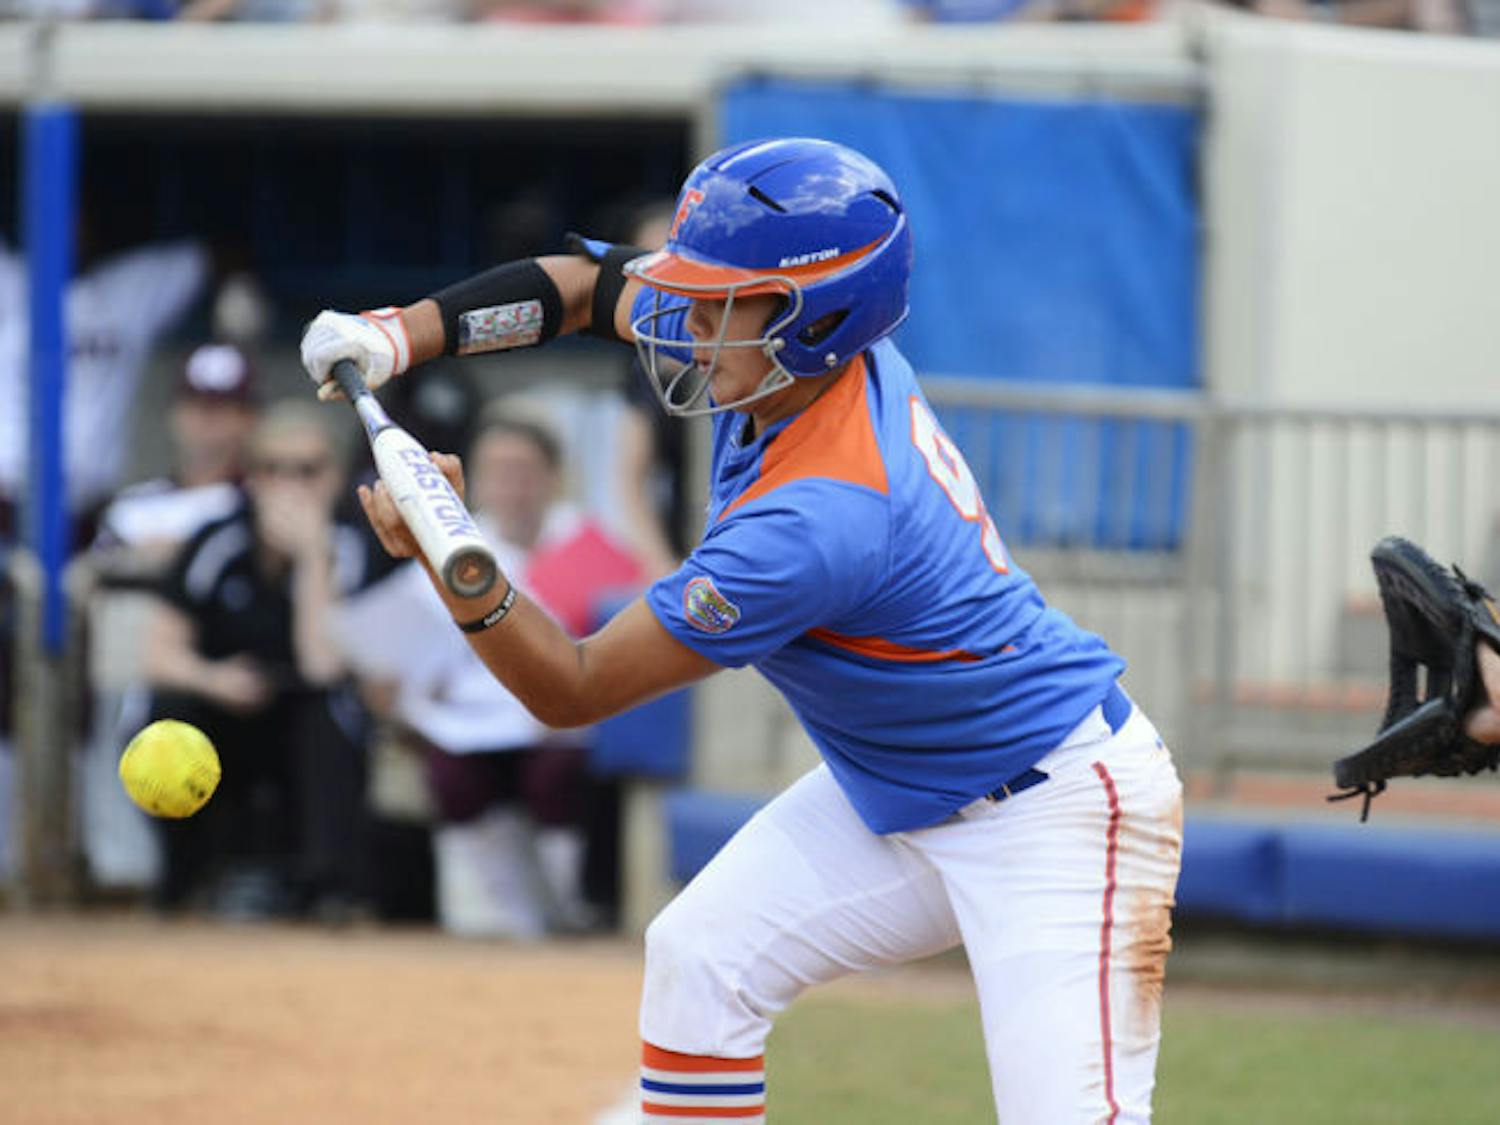 Junior third baseman Stephanie Tofft swings during Florida’s 4-2 win against Mississippi State on April 6 at Katie Seashole Pressly Stadium.&nbsp;